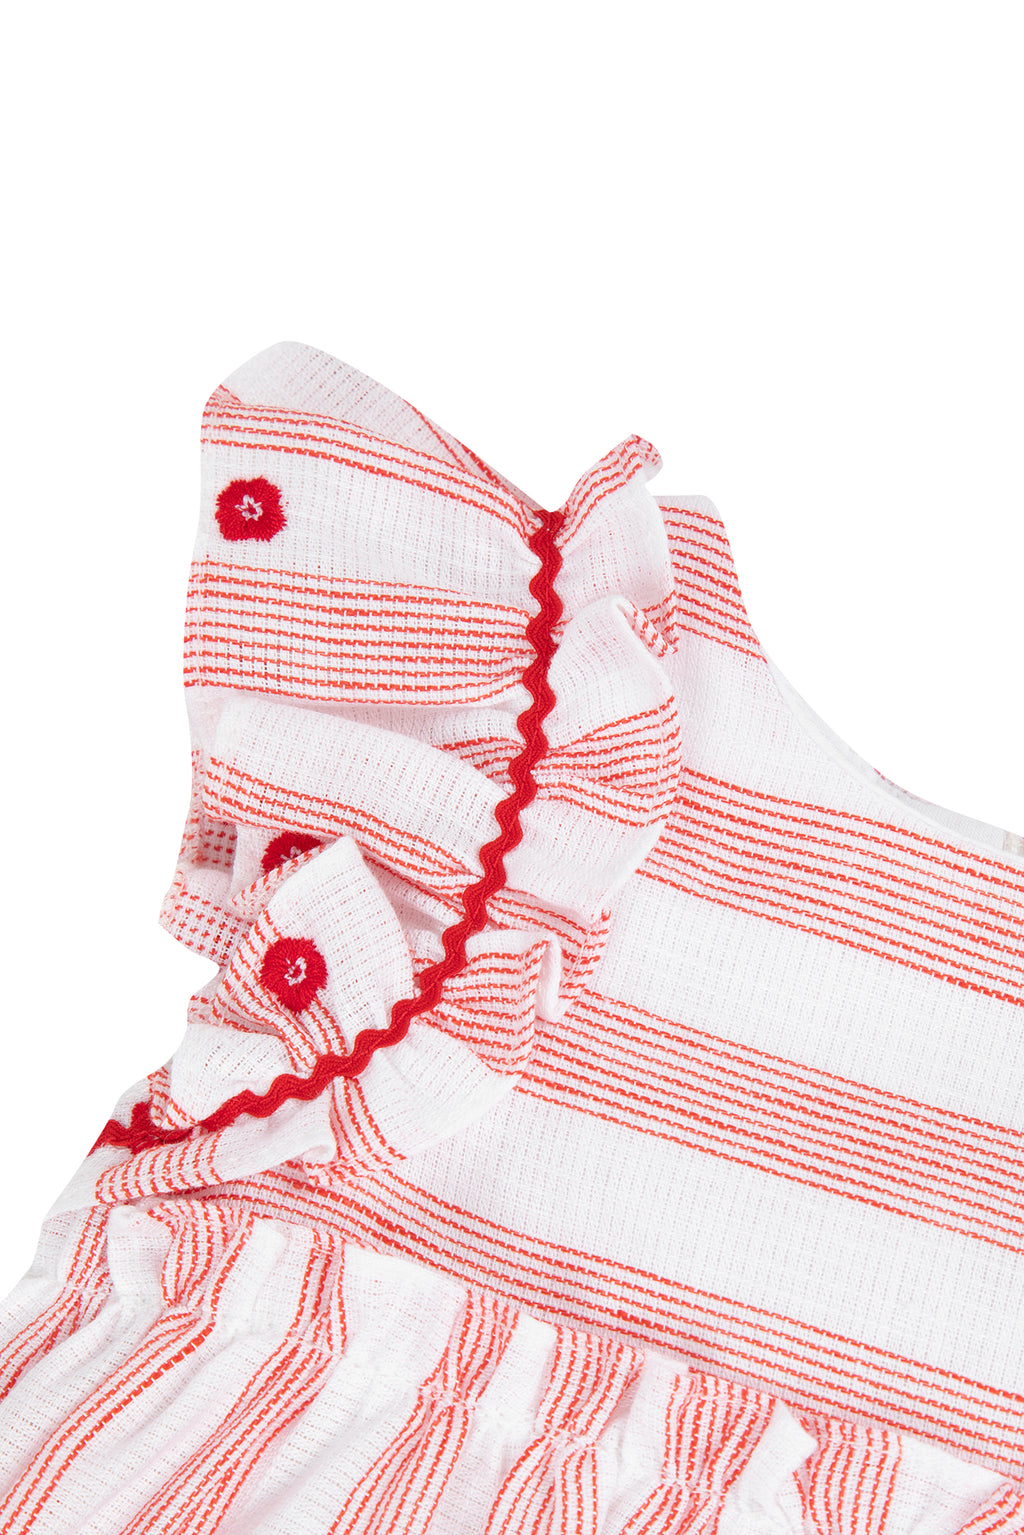 Dress - Coquelicot at Stripes